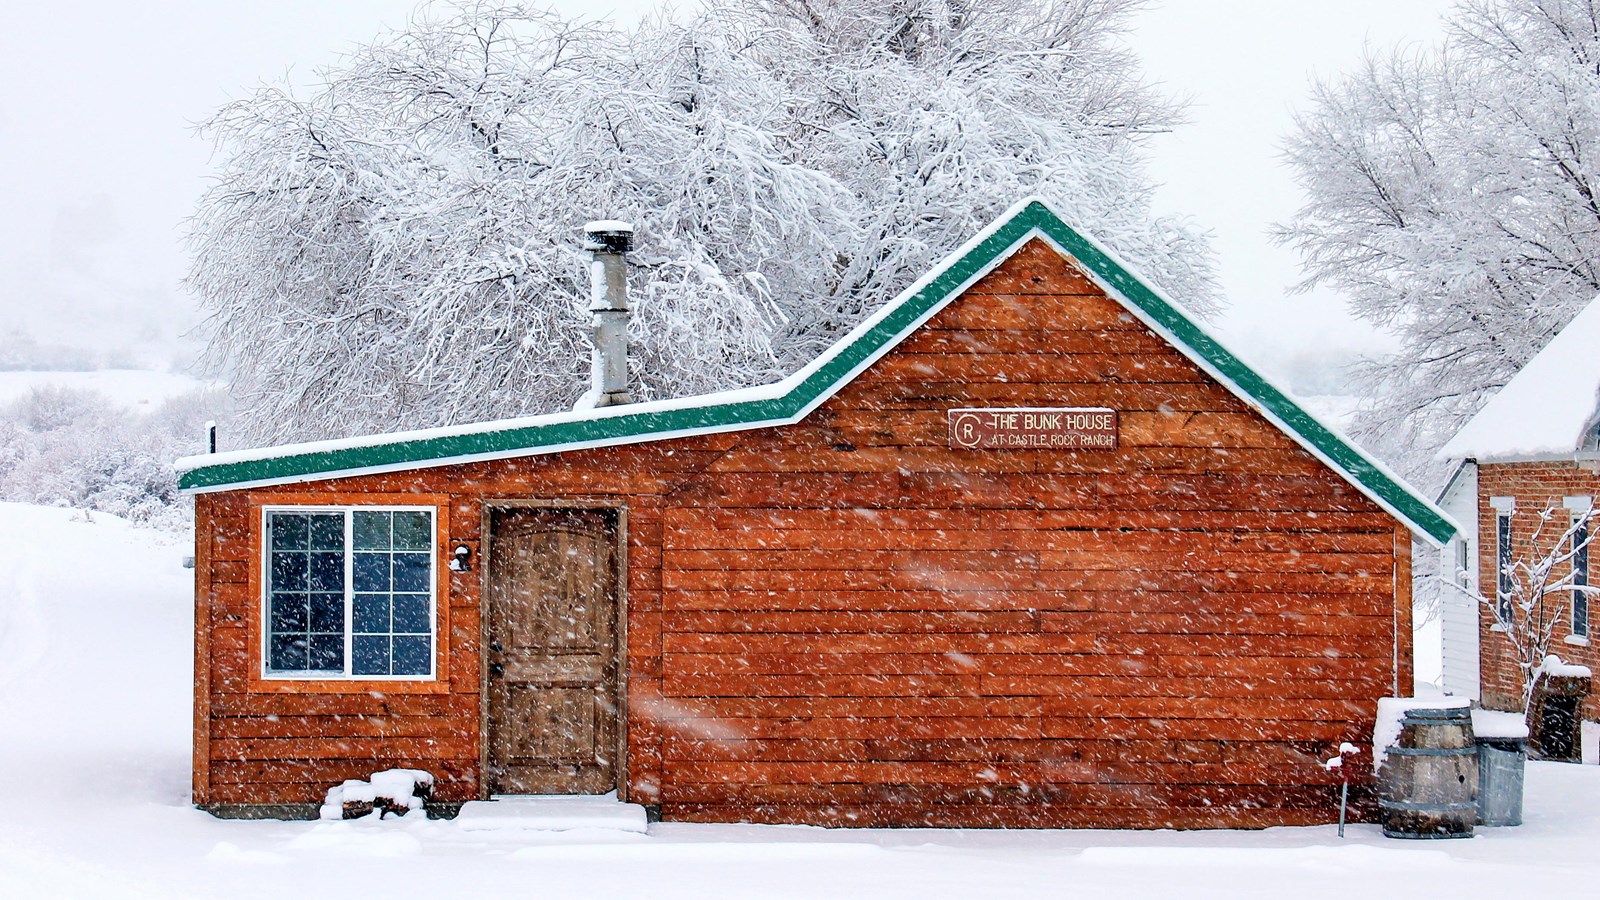 Front view of The Bunkhouse in a snowy winter scene.